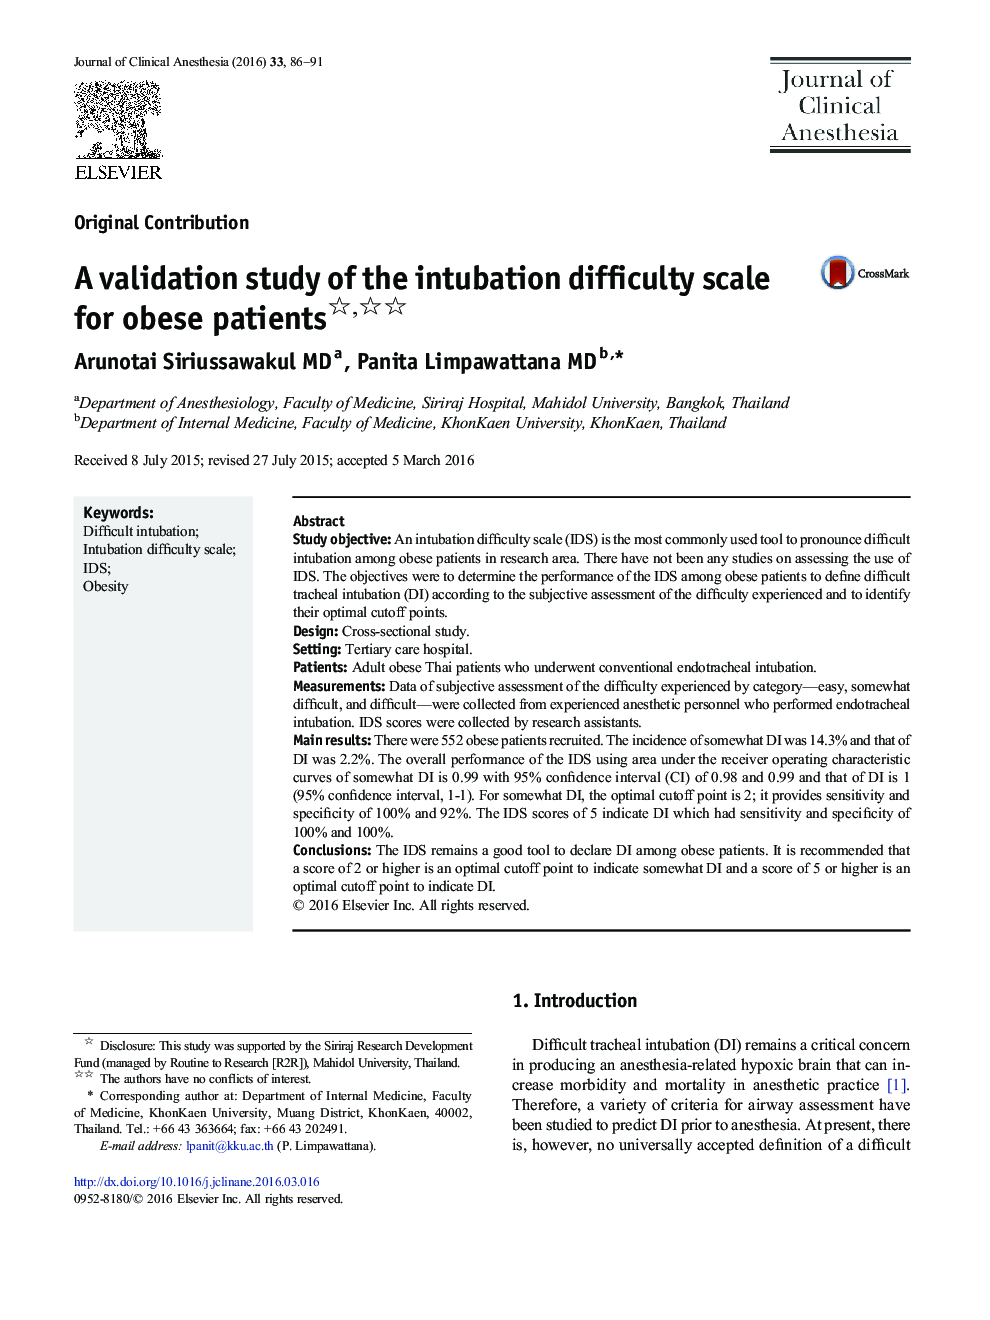 A validation study of the intubation difficulty scale for obese patients 